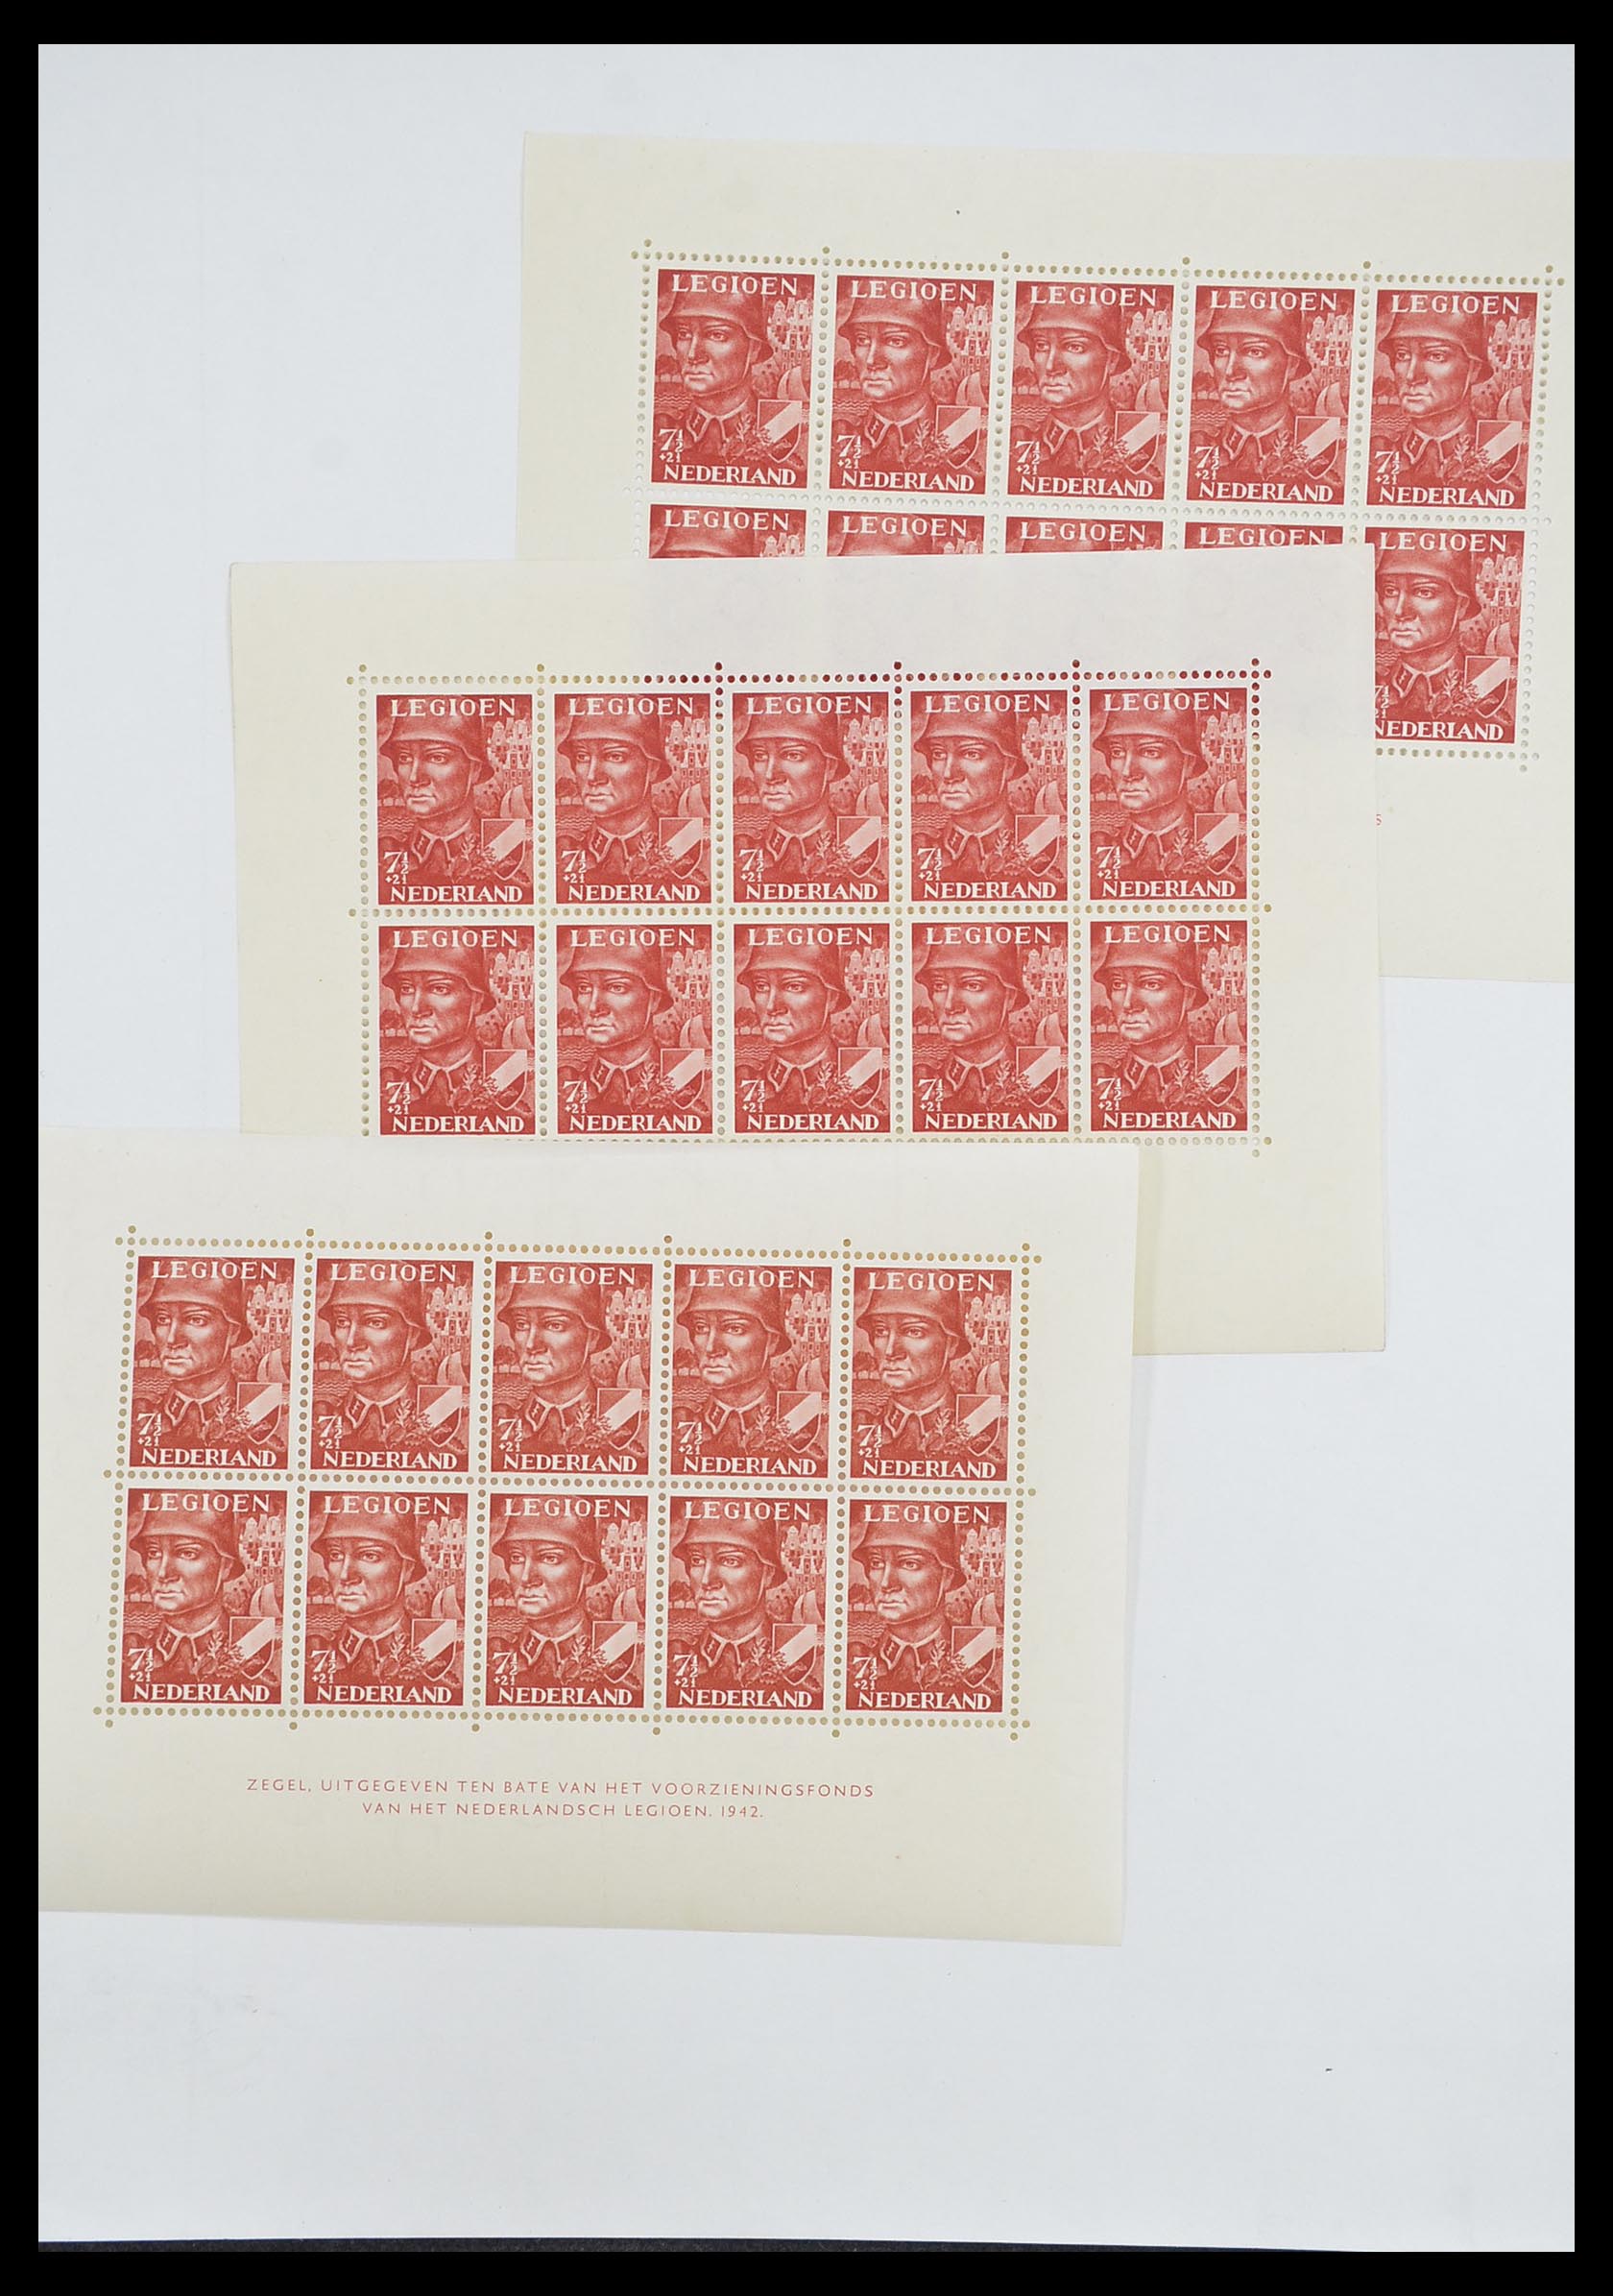 33940 428 - Stamp collection 33940 Netherlands and Dutch territories 1852-1965.